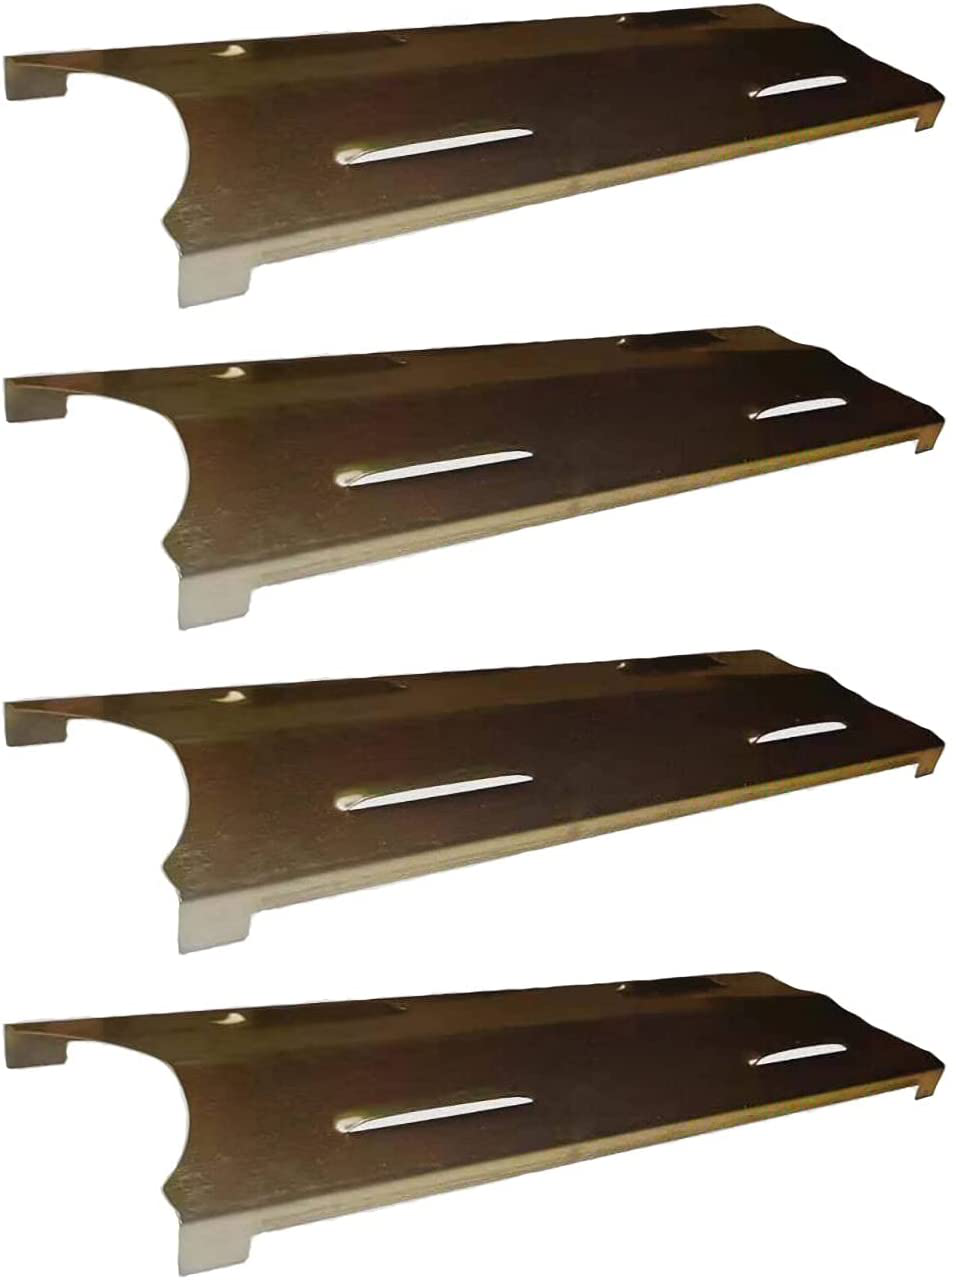 Does Not Apply Grill heat plates 4-pack for master forge bg179a academy sports brinkmann lowes